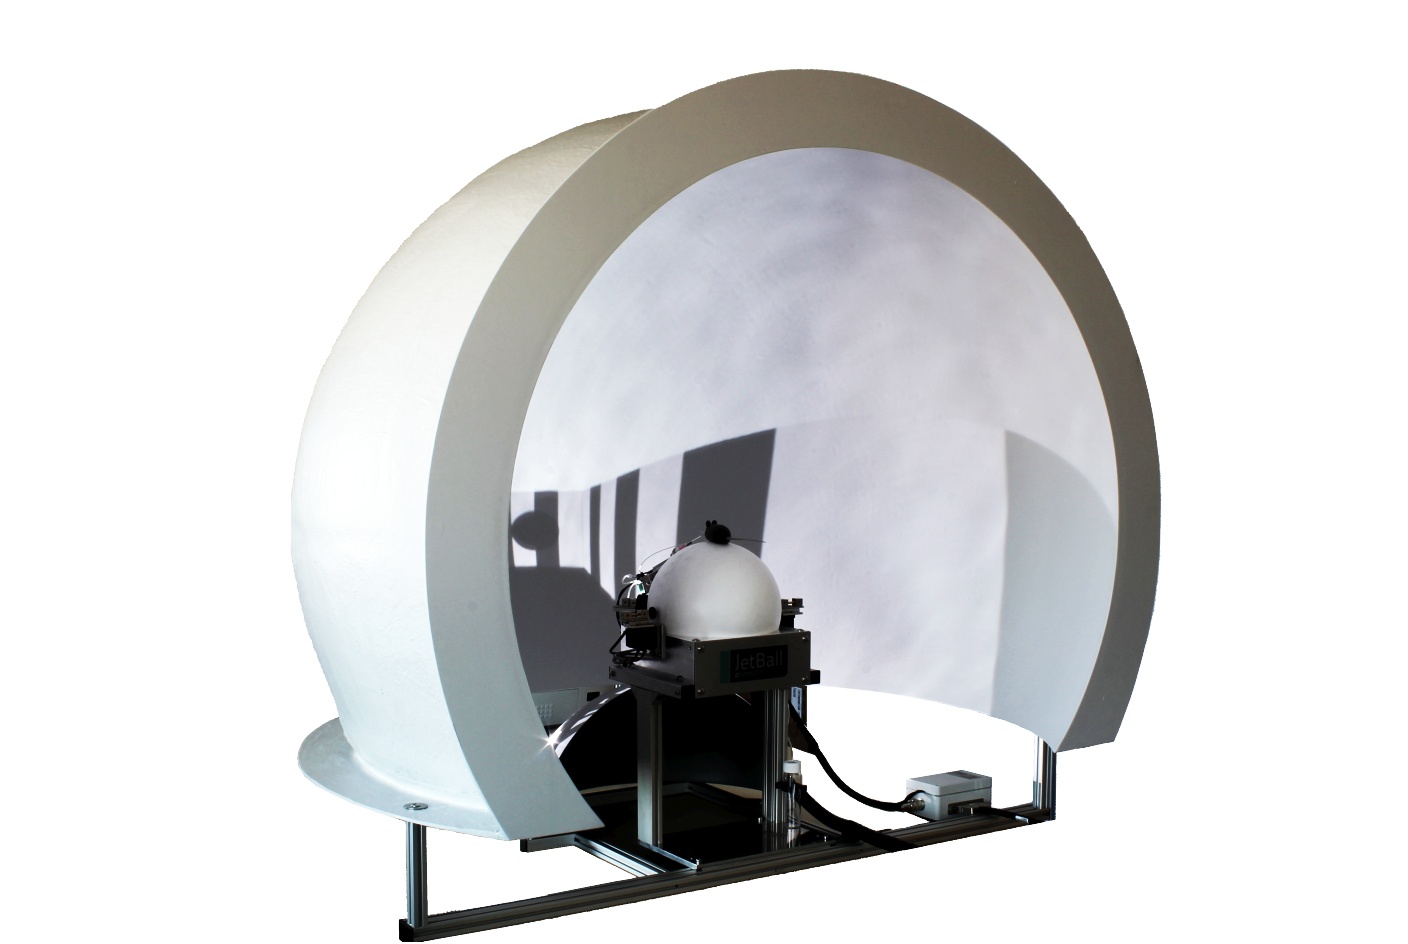 JetBall Dome for mice with projection system